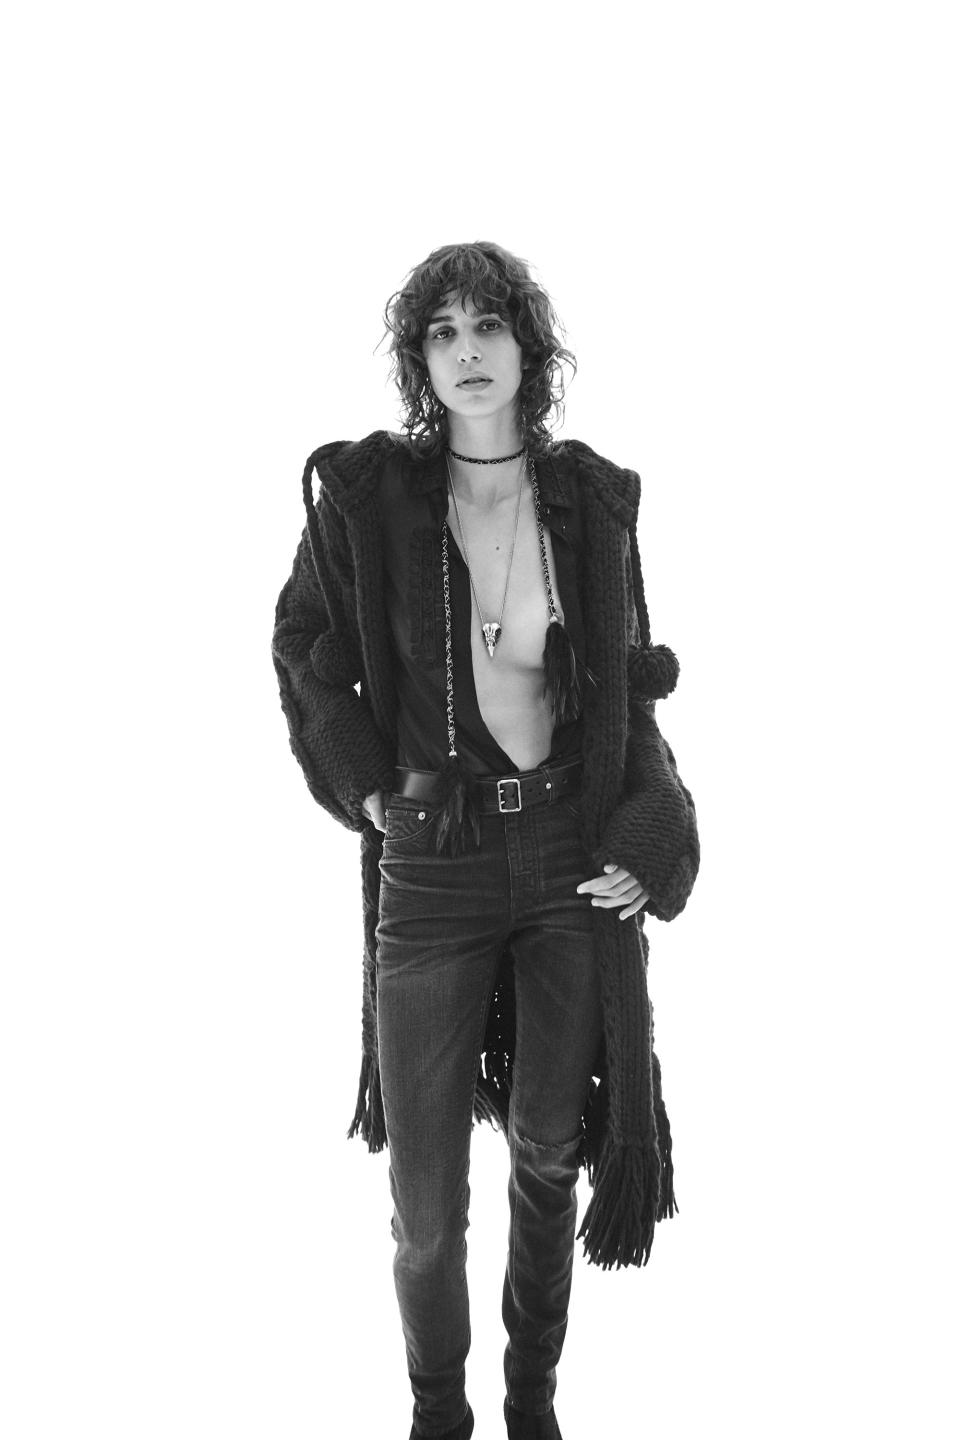 See every look from Anthony Vaccarello’s first pre-collection for Saint Laurent.